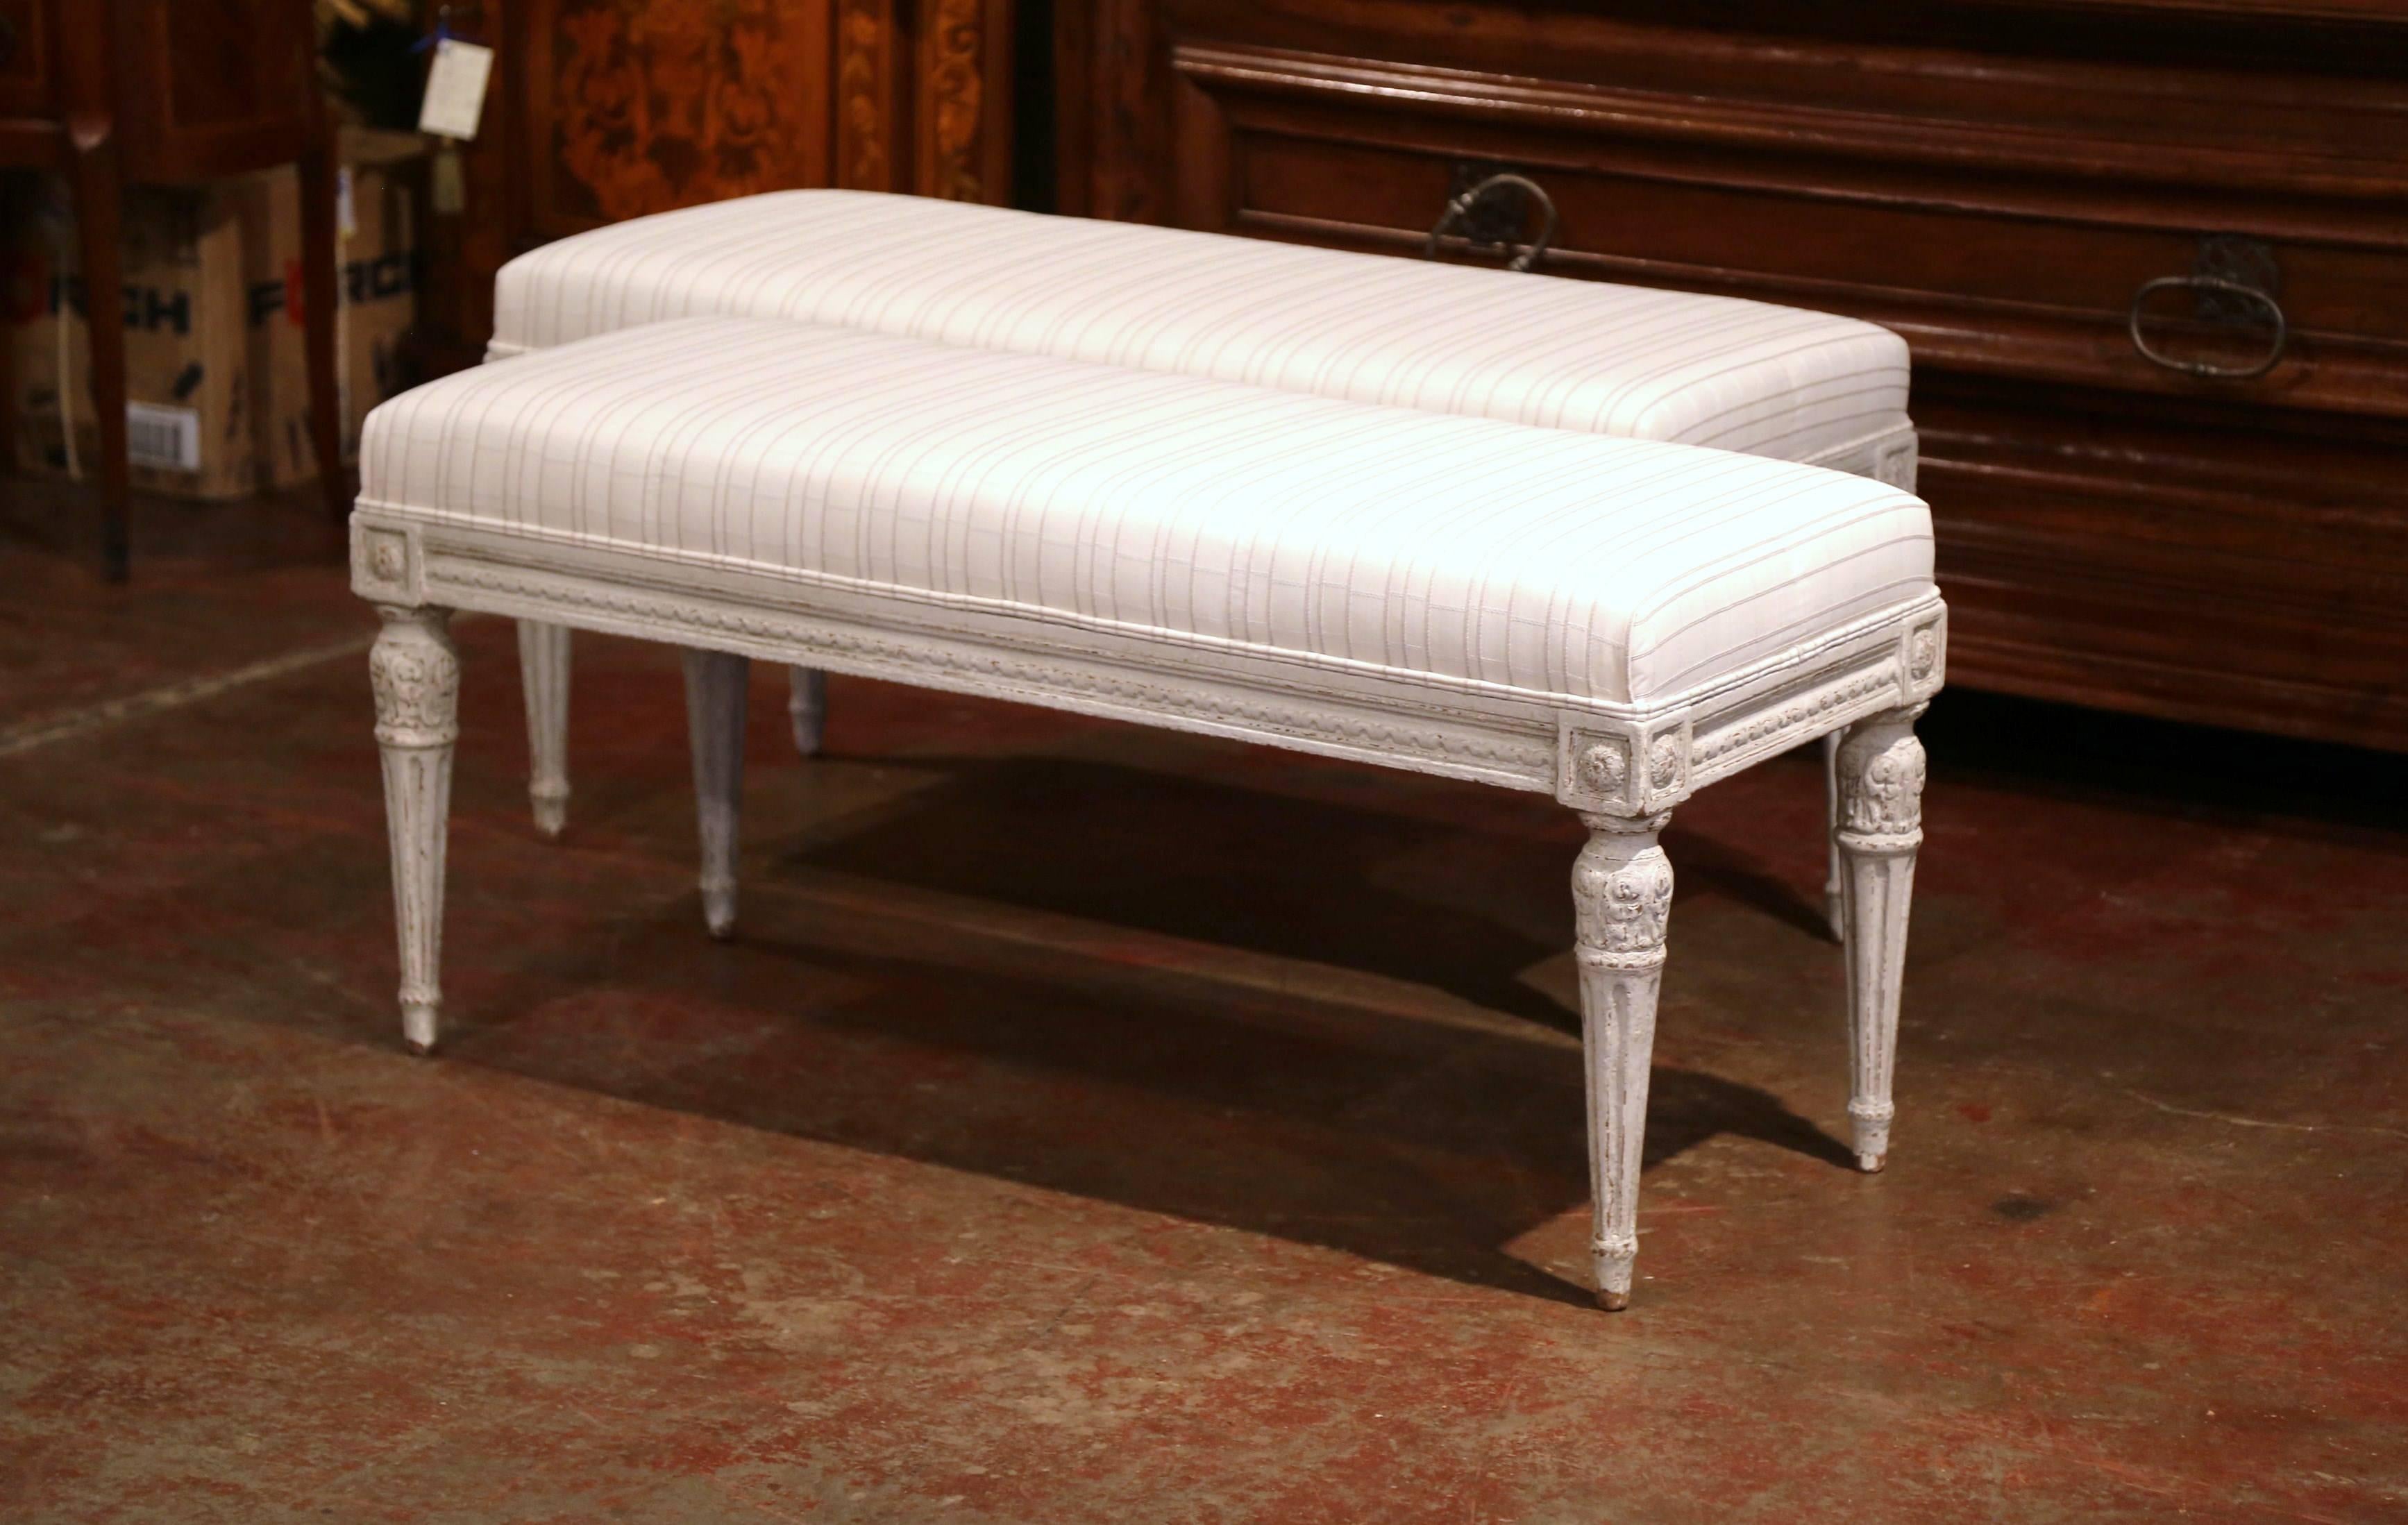 Complete your entryway or living room or bedroom with this pair of antique grey painted benches from France, circa 1890. Rectangular in shape, these pieces feature a carved design around the apron including flower medallions and four fluted legs.